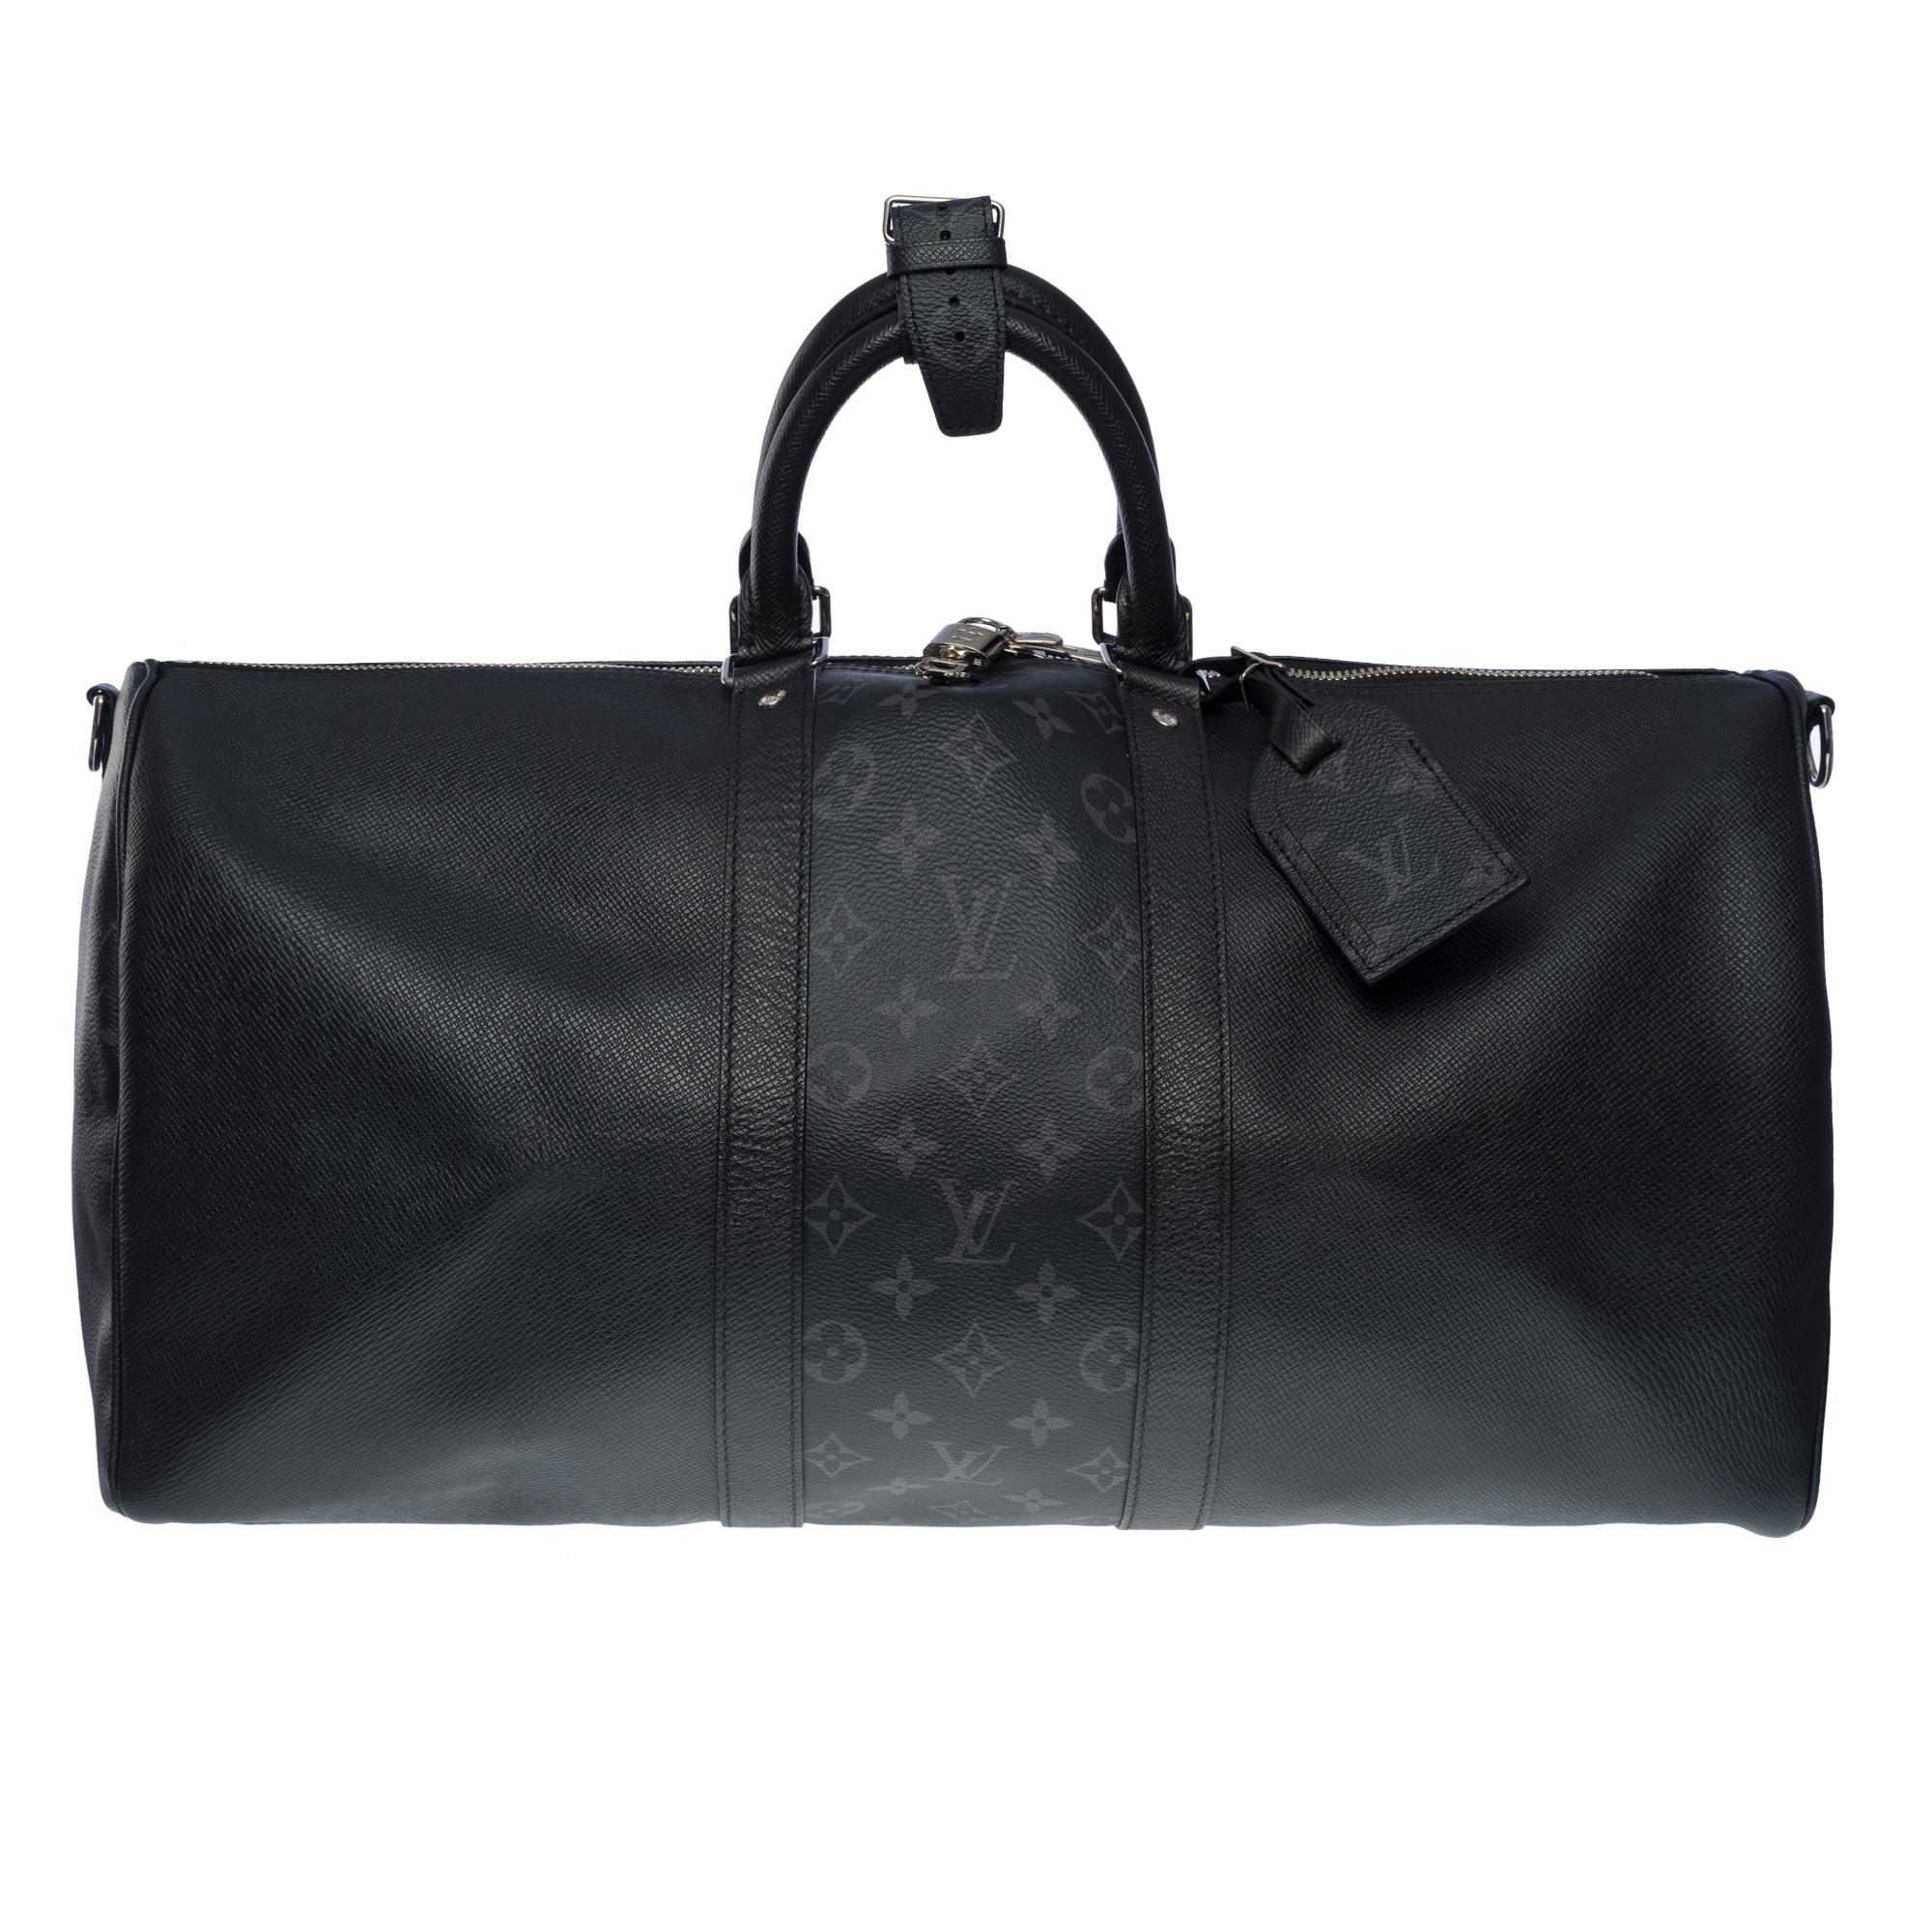 This  Amazing and Rare Keepall 50 Taïgarama adopts a new look for the Spring-Summer 2019 season
Its monochrome design turns out to be in a nuanced color that combines Monogram canvas and soft Taiga leather

This lightweight bag offers generous cabin